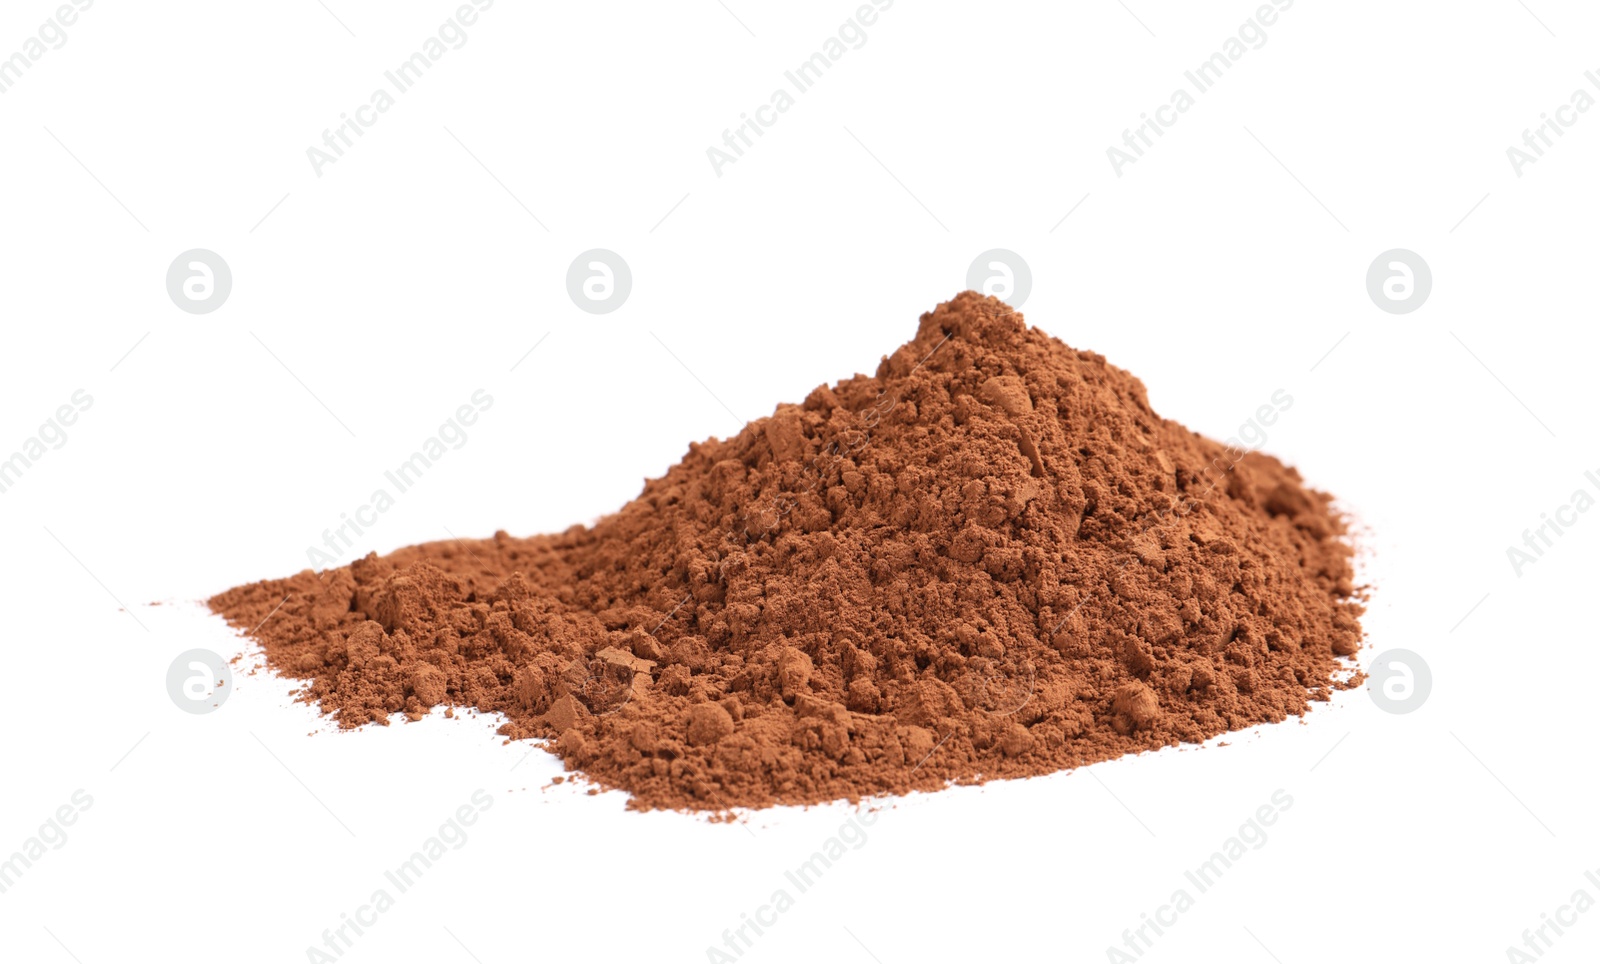 Photo of Pile of chocolate protein powder isolated on white